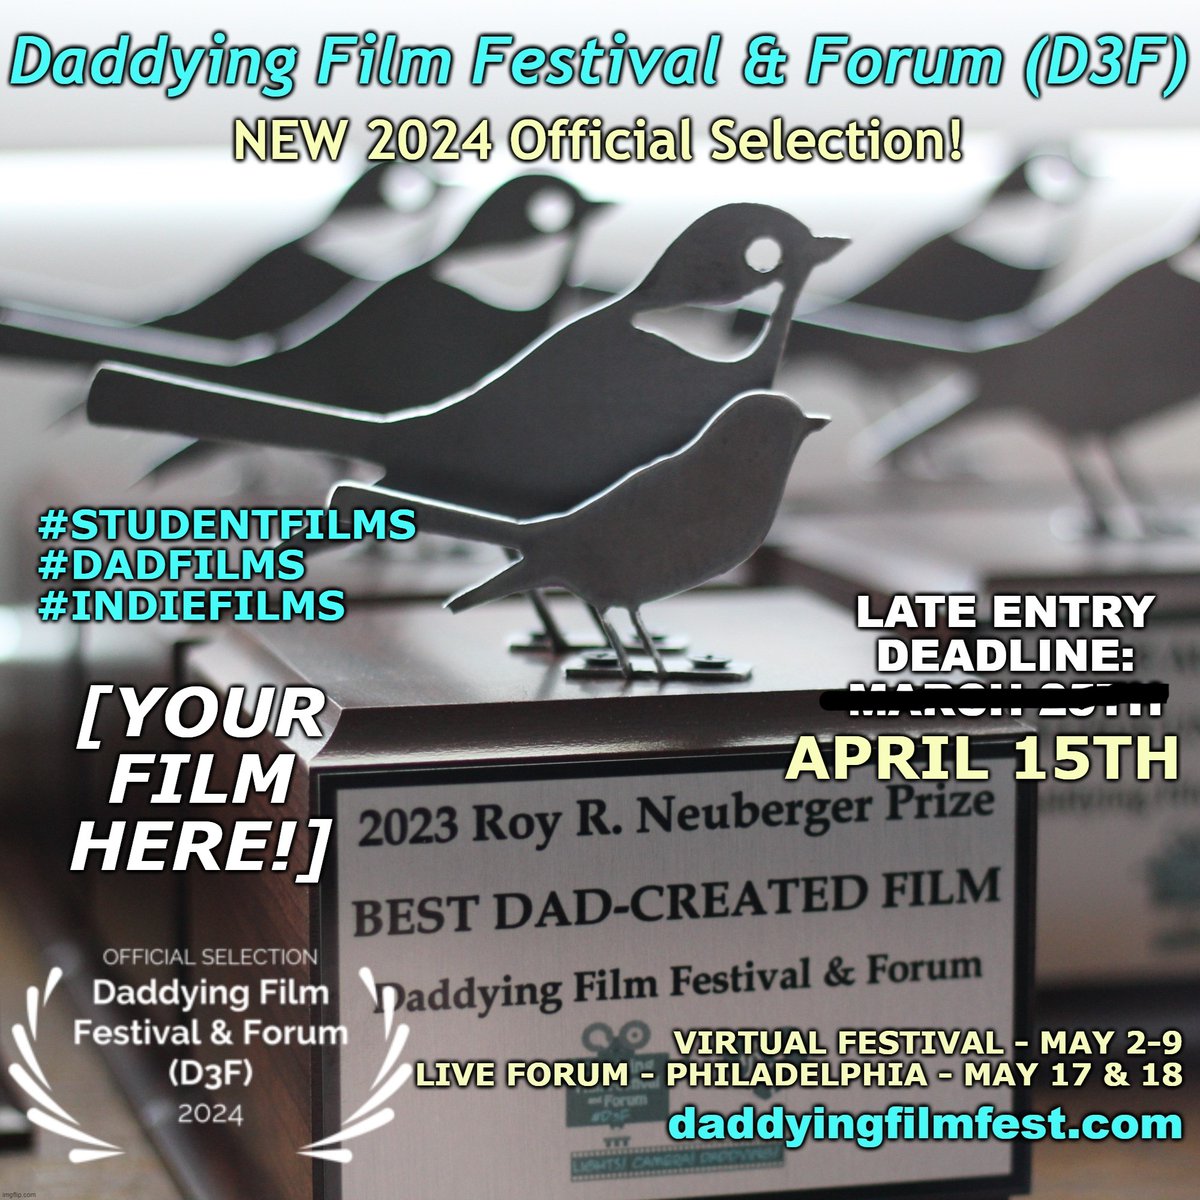 🚨TOMORROW, APRIL 15 is the final day for students, dads/dad figures and indies to submit films/videos to the #Daddying #FilmFestival on @FilmFreeway: filmfreeway.com/DaddyingFilmFe…

#callforsubmissions #dadlife @equimundo_org @ArtEddy3 @Fathersincorp @homedadnet @ParentCamp @HSFilmFest